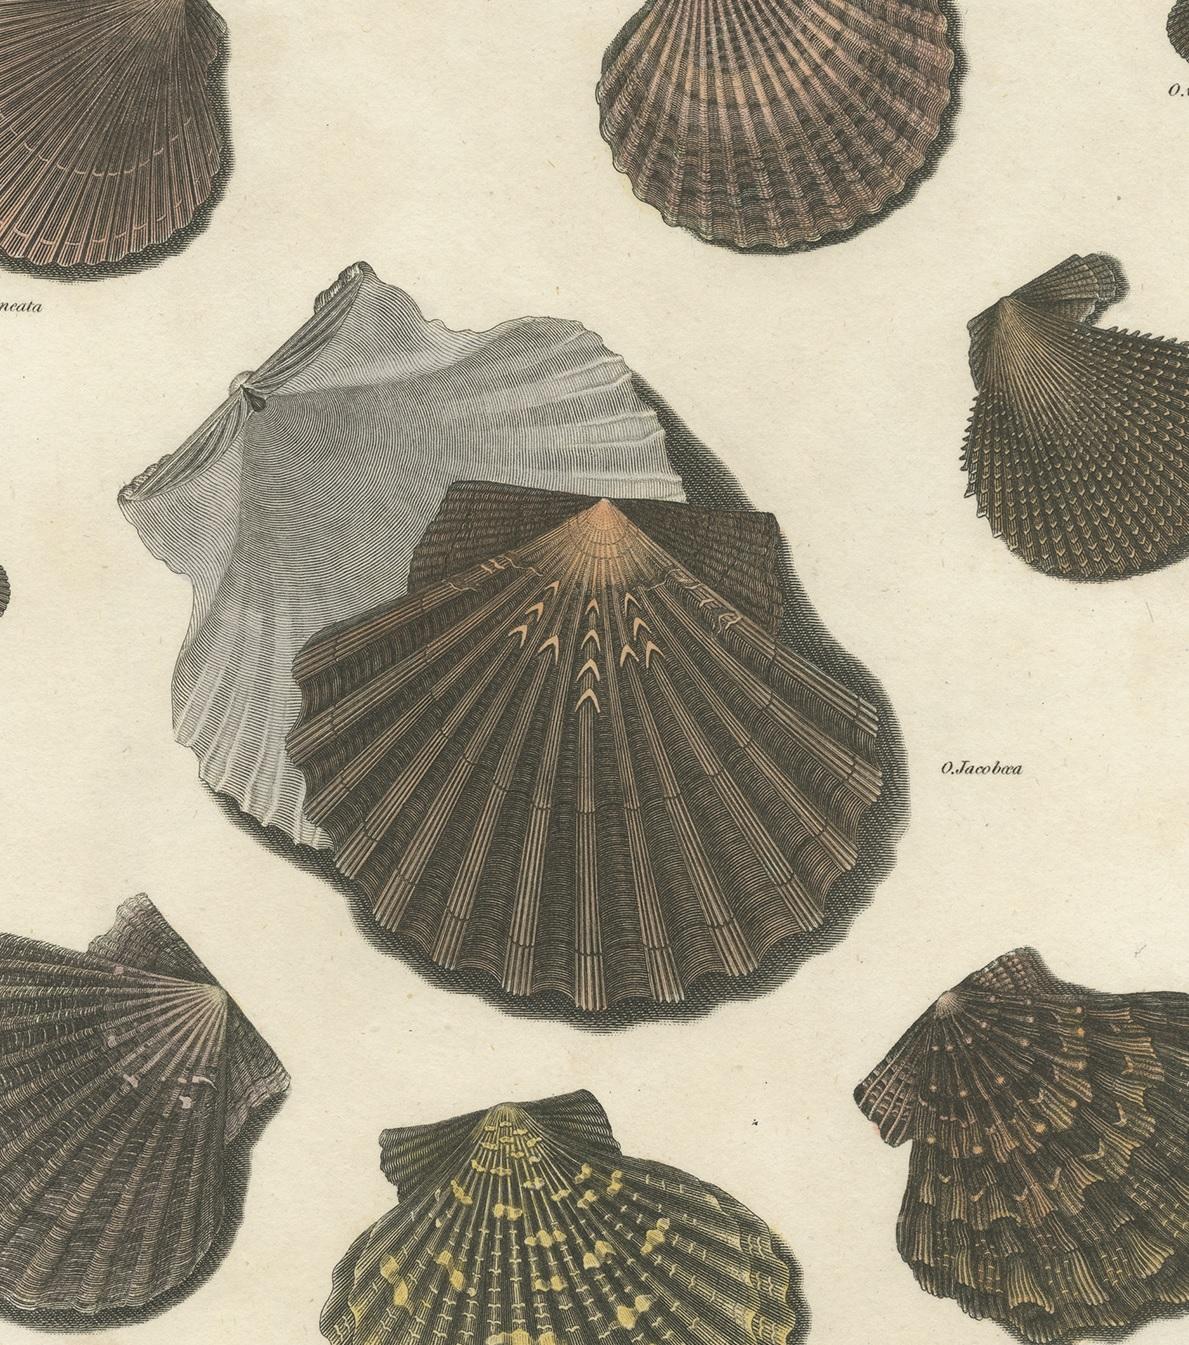 Antique print depictin Ostrea, a genus of edible oysters, marine bivalve mollusks in the family Ostreidae, the oysters. Issued in 1809 as part of the conchology section of Abraham Rees’ Cyclopaedia or Universal Dictionary of Arts, Sciences and